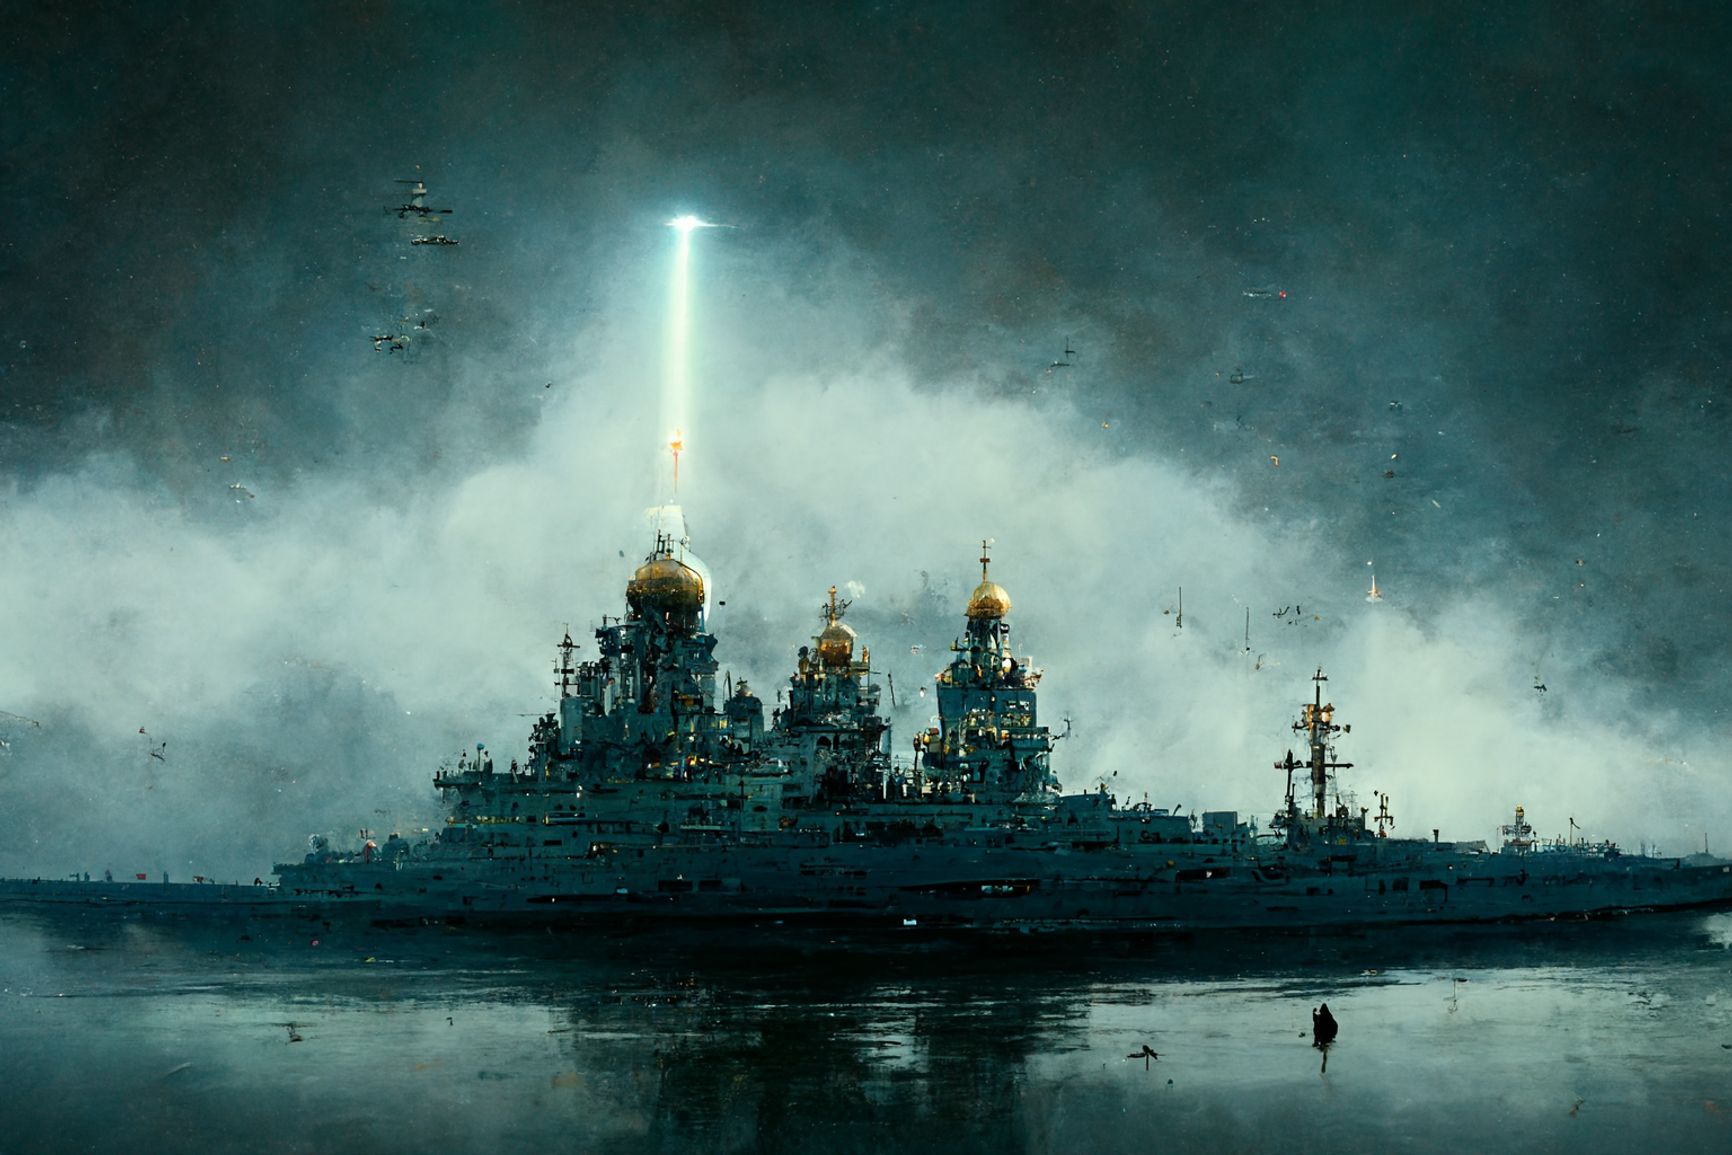 Zircons and Poseidons are meant to become the Russian Navy's “wonder weapon”